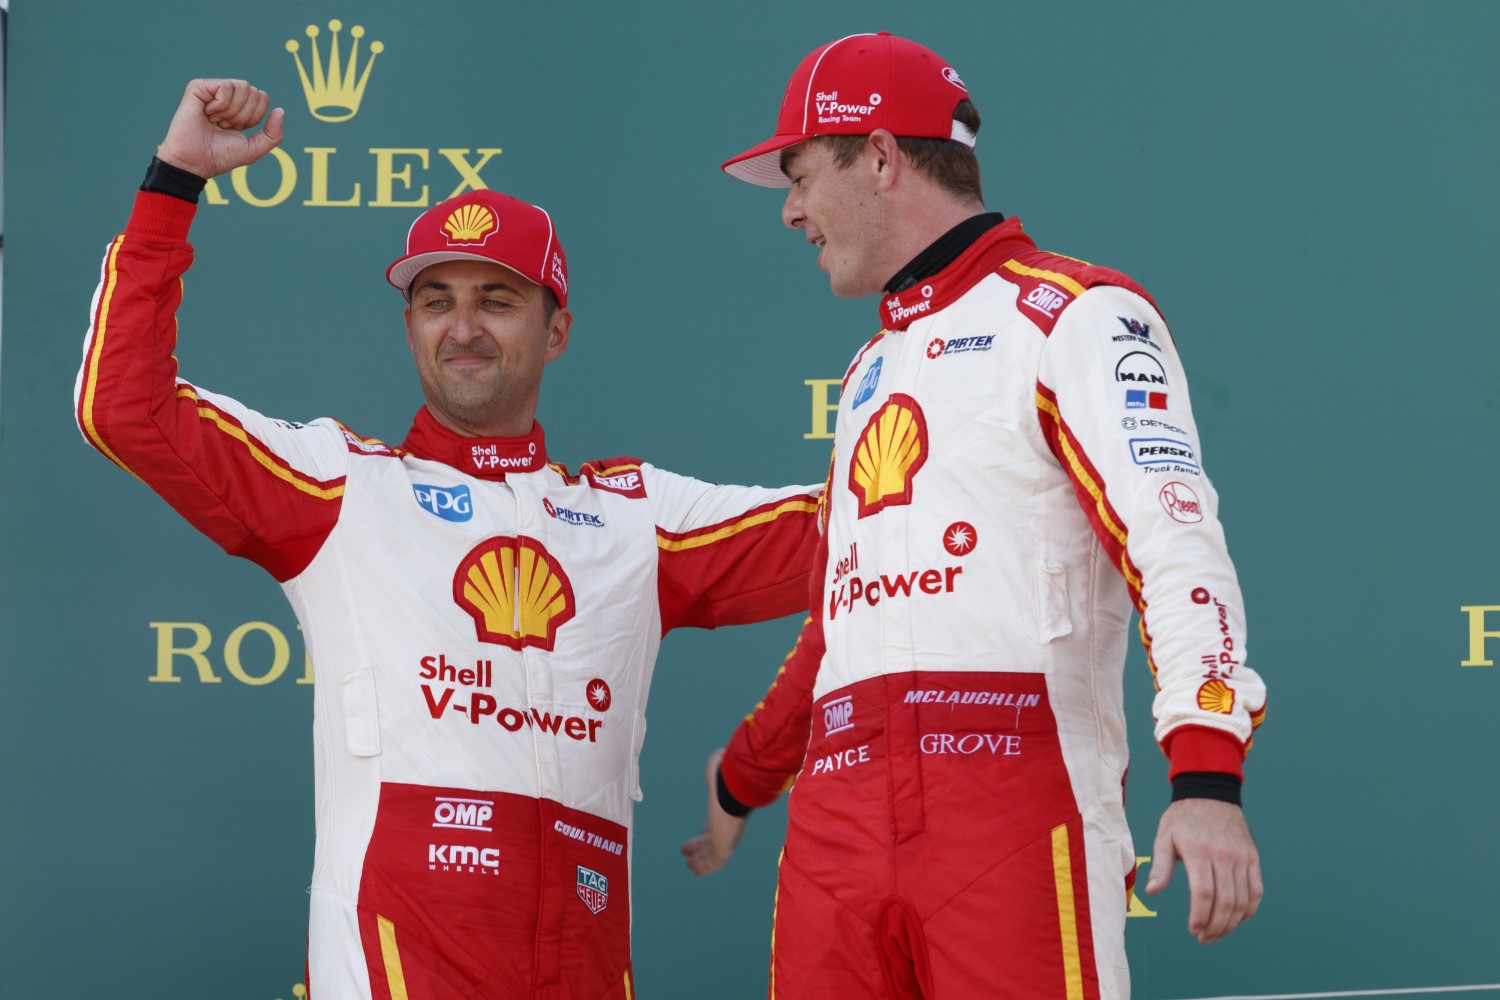 Coulthard and McLaughlin